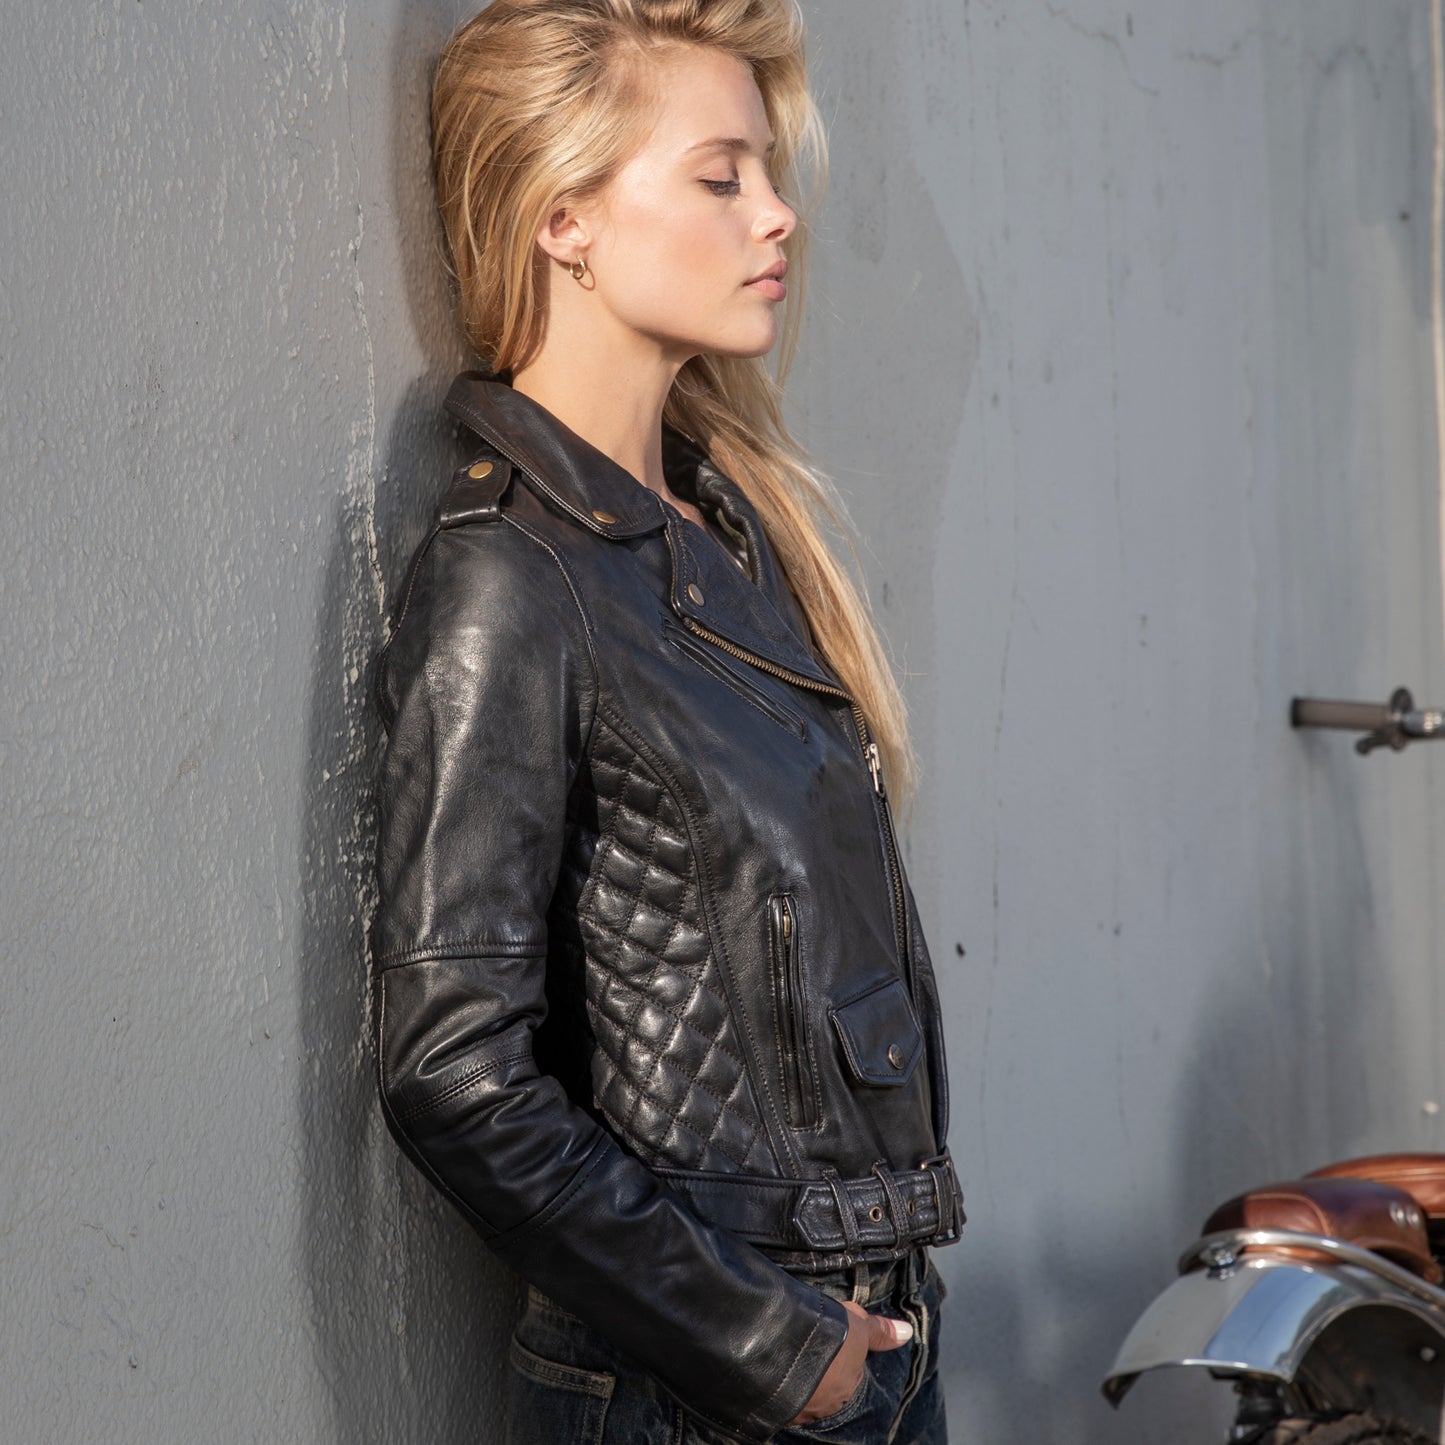 "Perfecto" Women Leather jacket - Heroes Motorcycles